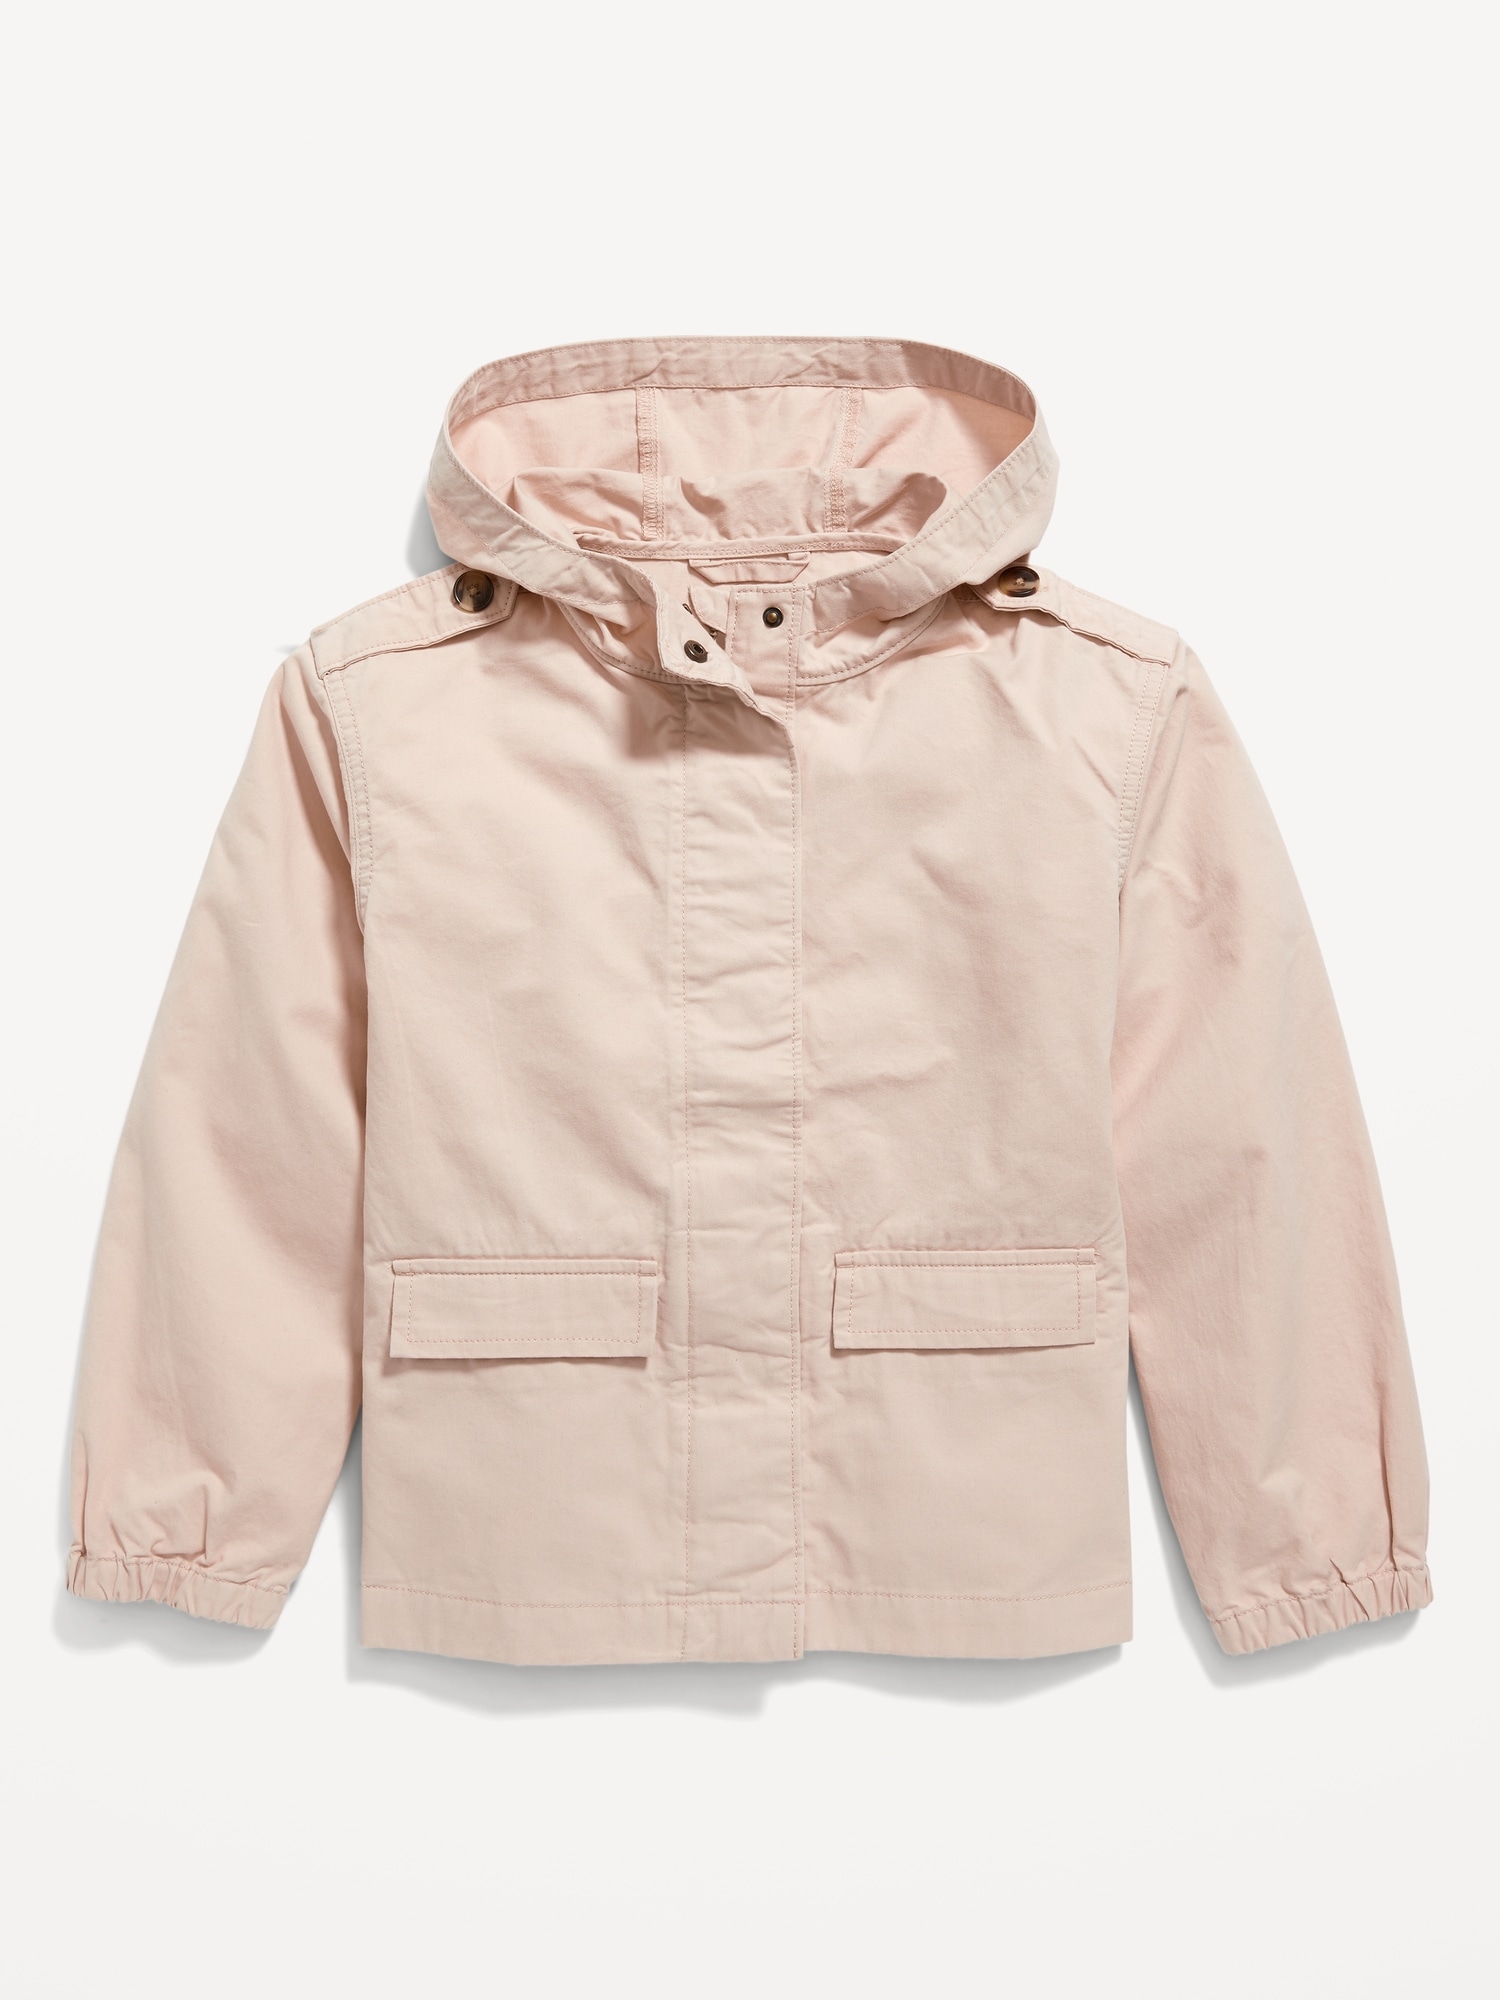 Old Navy Hooded Twill Utility Jacket for Girls beige. 1